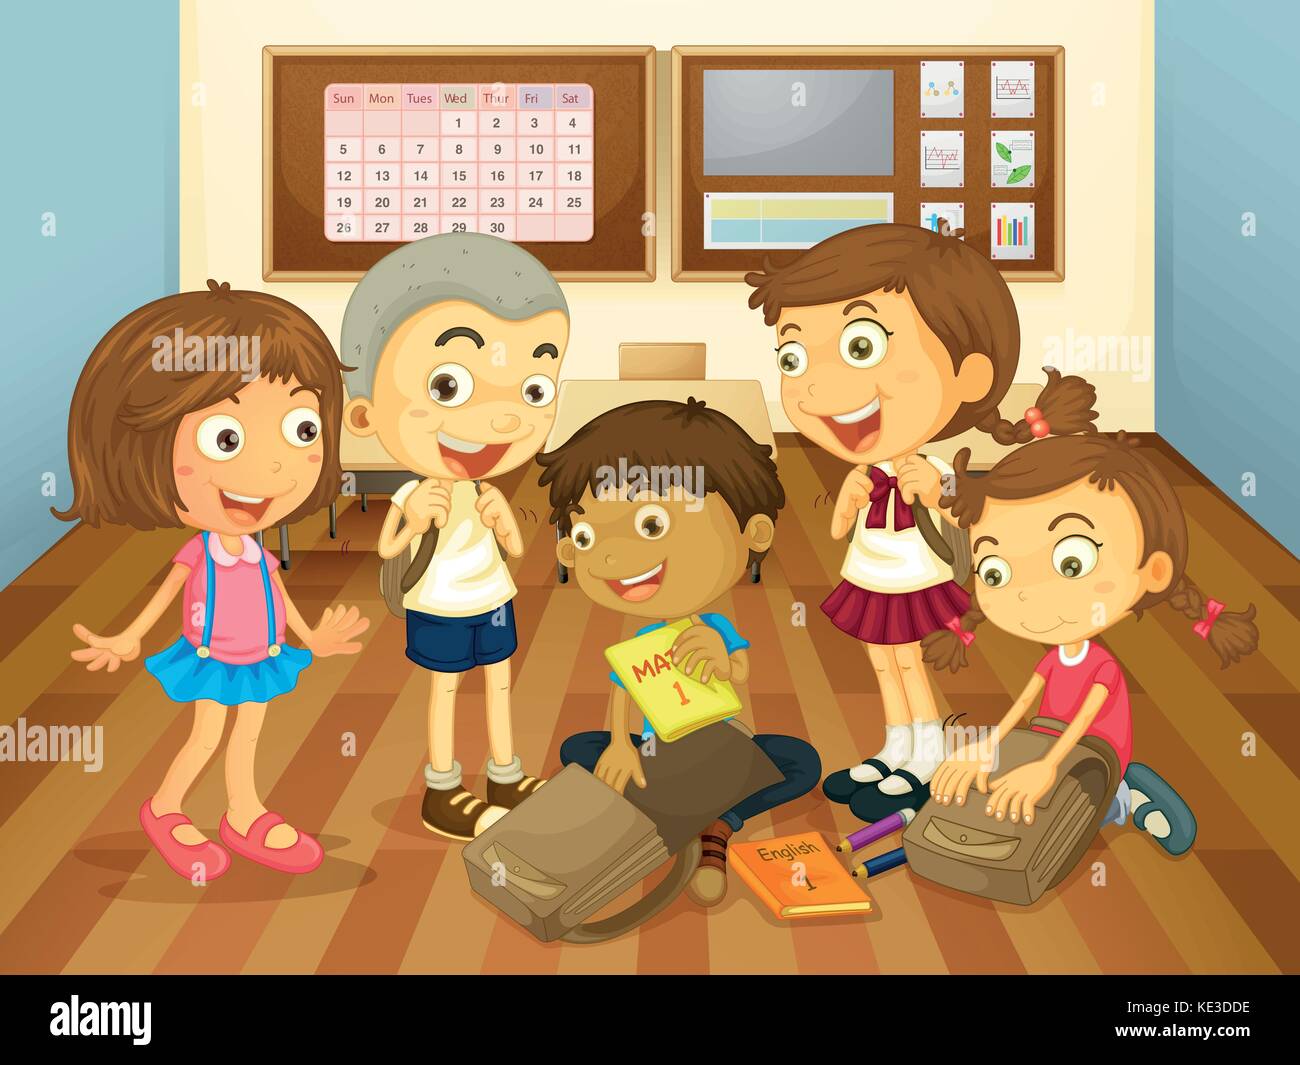 Children learning in the classroom illustration Stock Vector